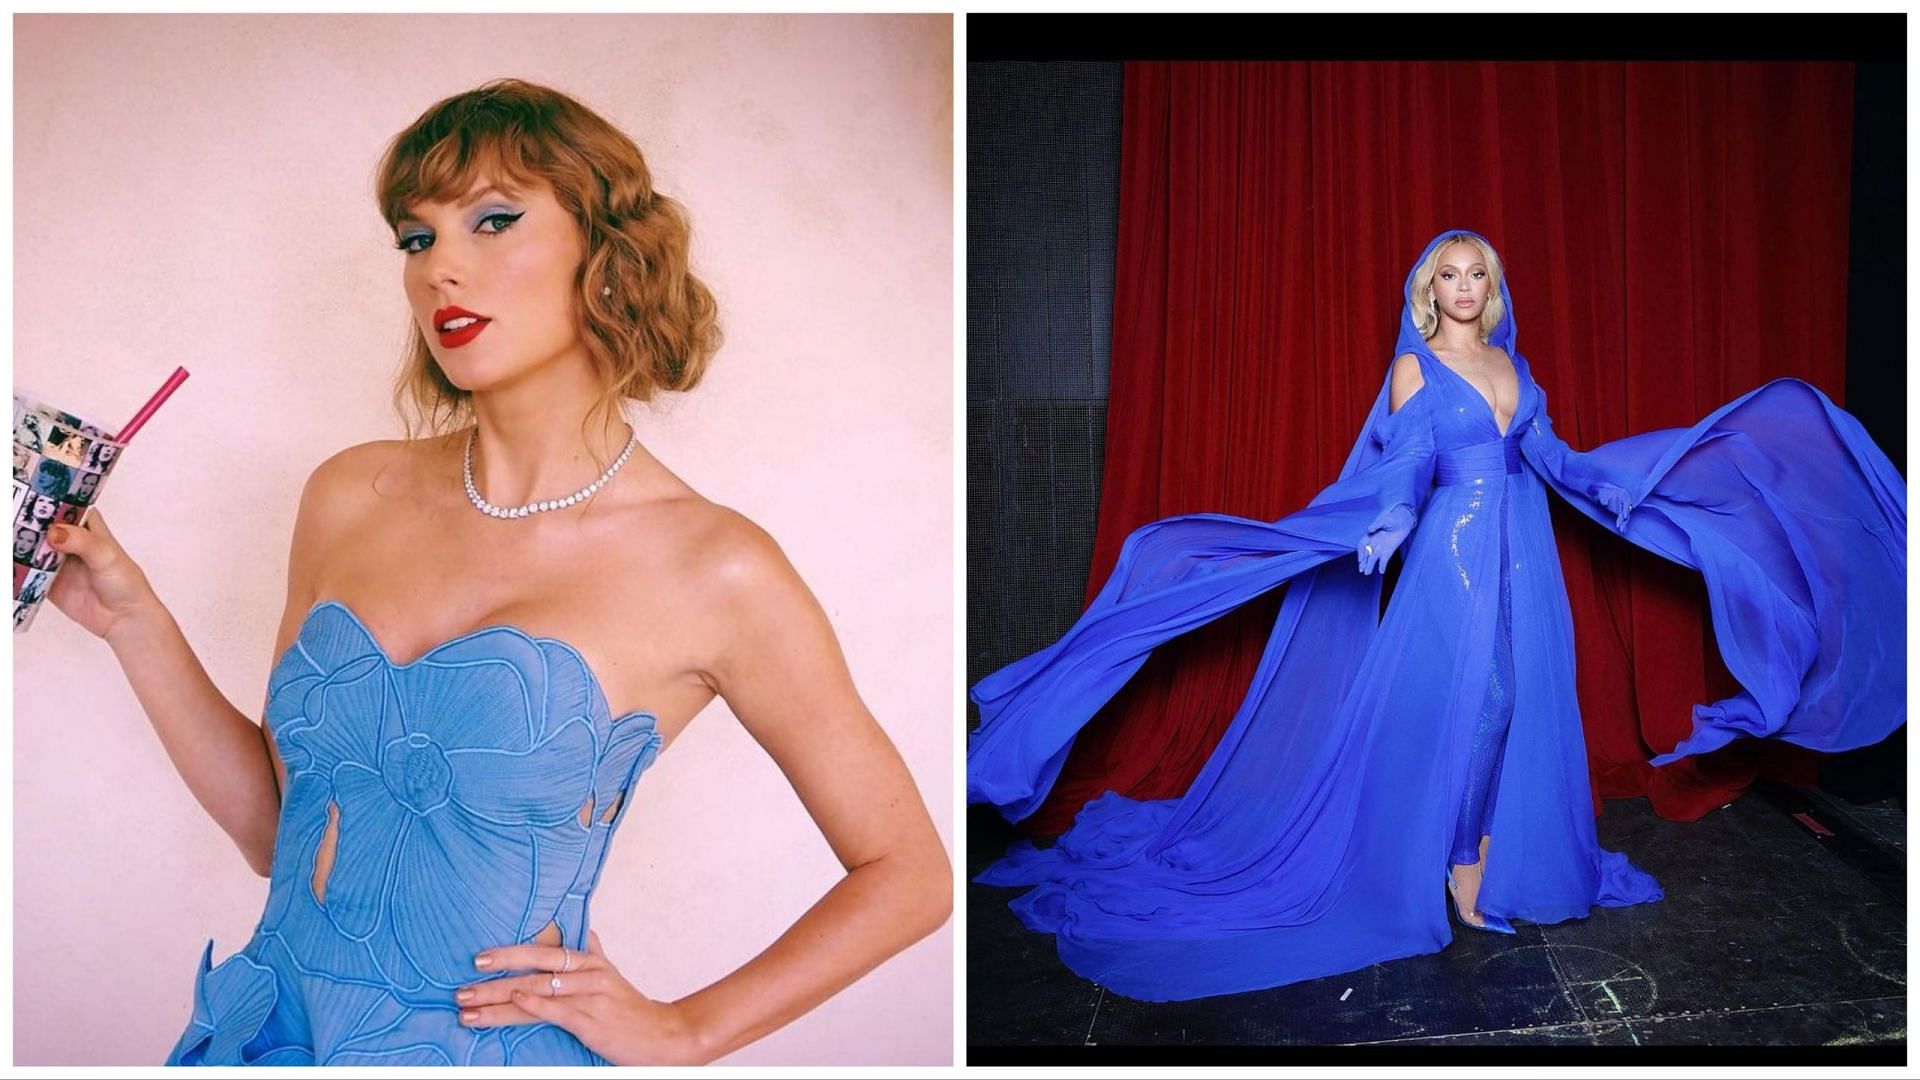 Portraits of Taylor Swift and Beyonce (Images via official Instagram @beyonce and @taylorswift)